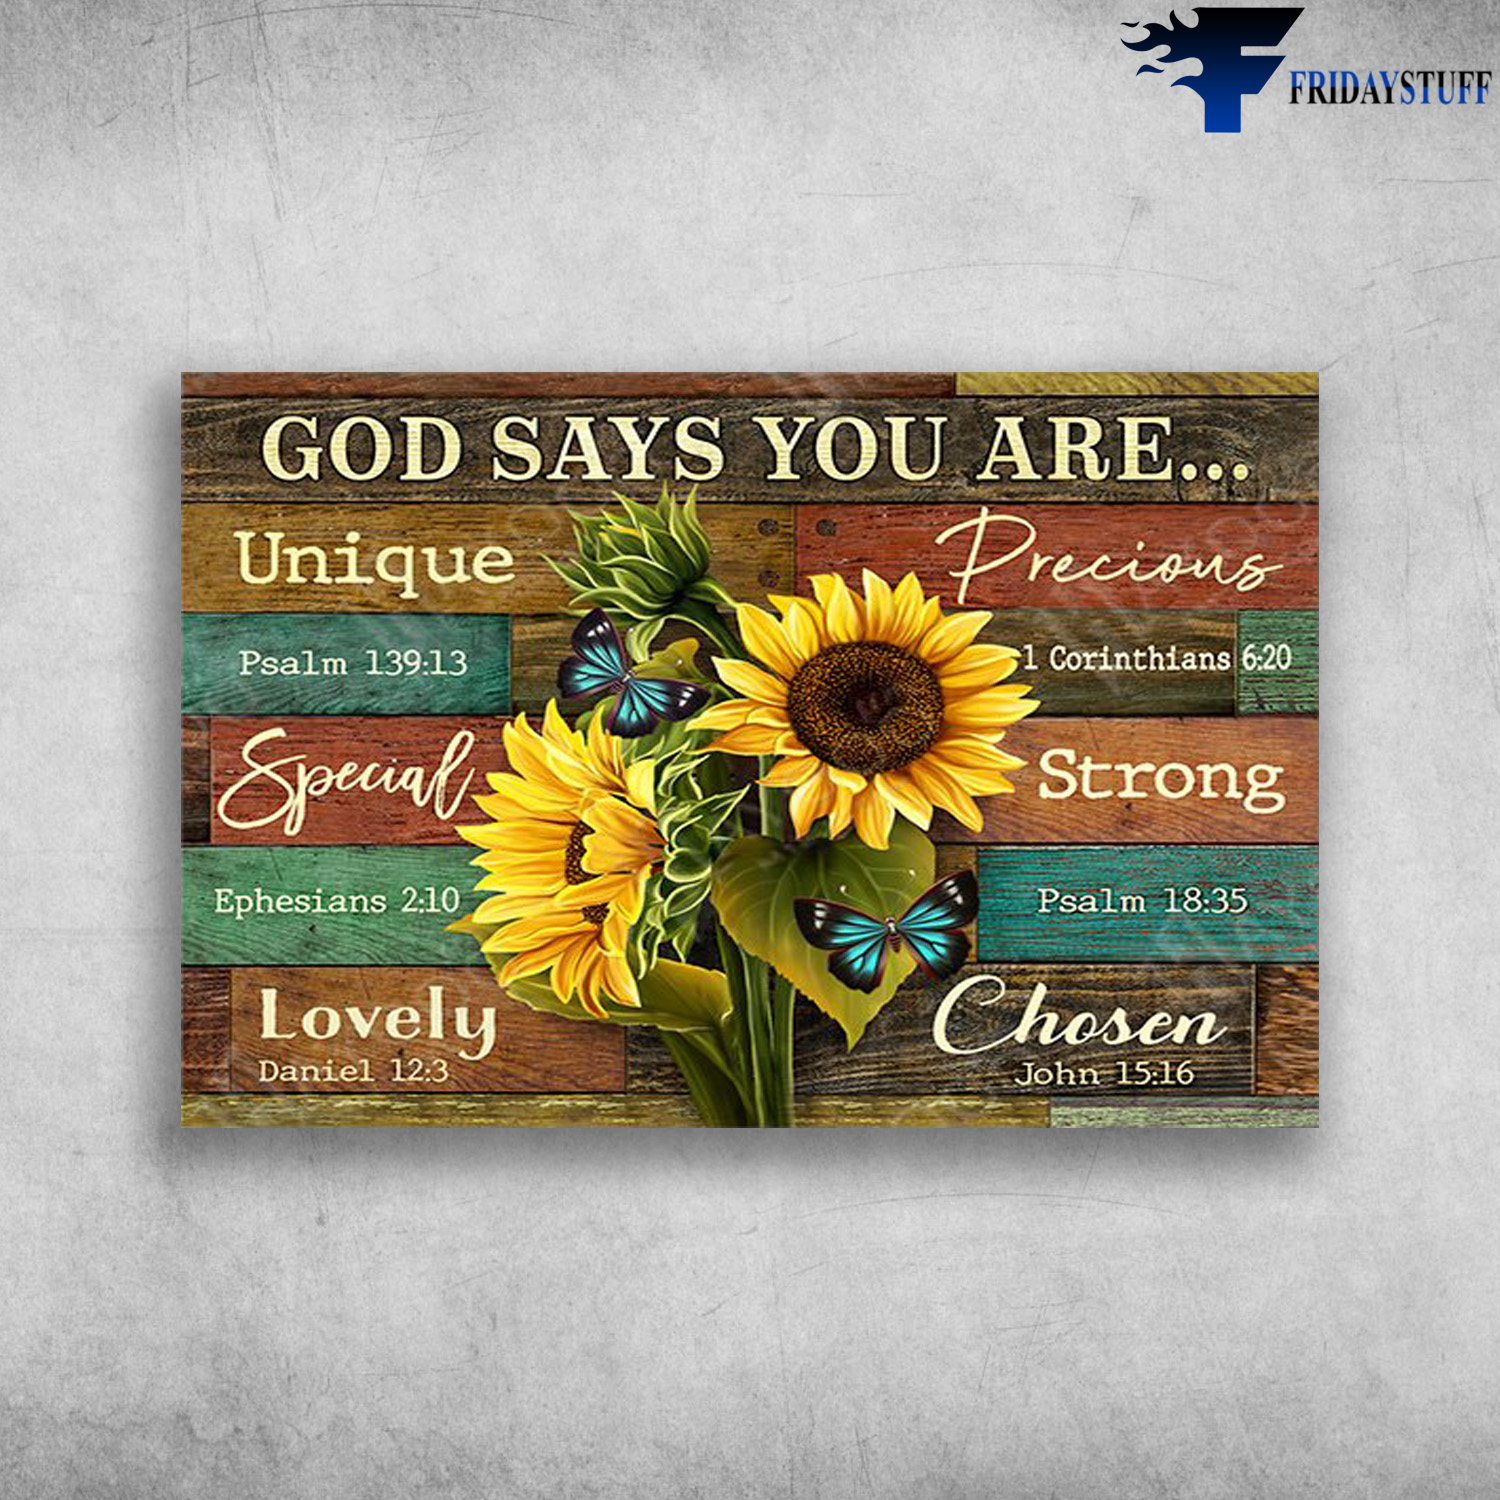 Butterfly And Sunflower - God Says You Are Unique, Precious, Special, Strong, Lovely, Chosen